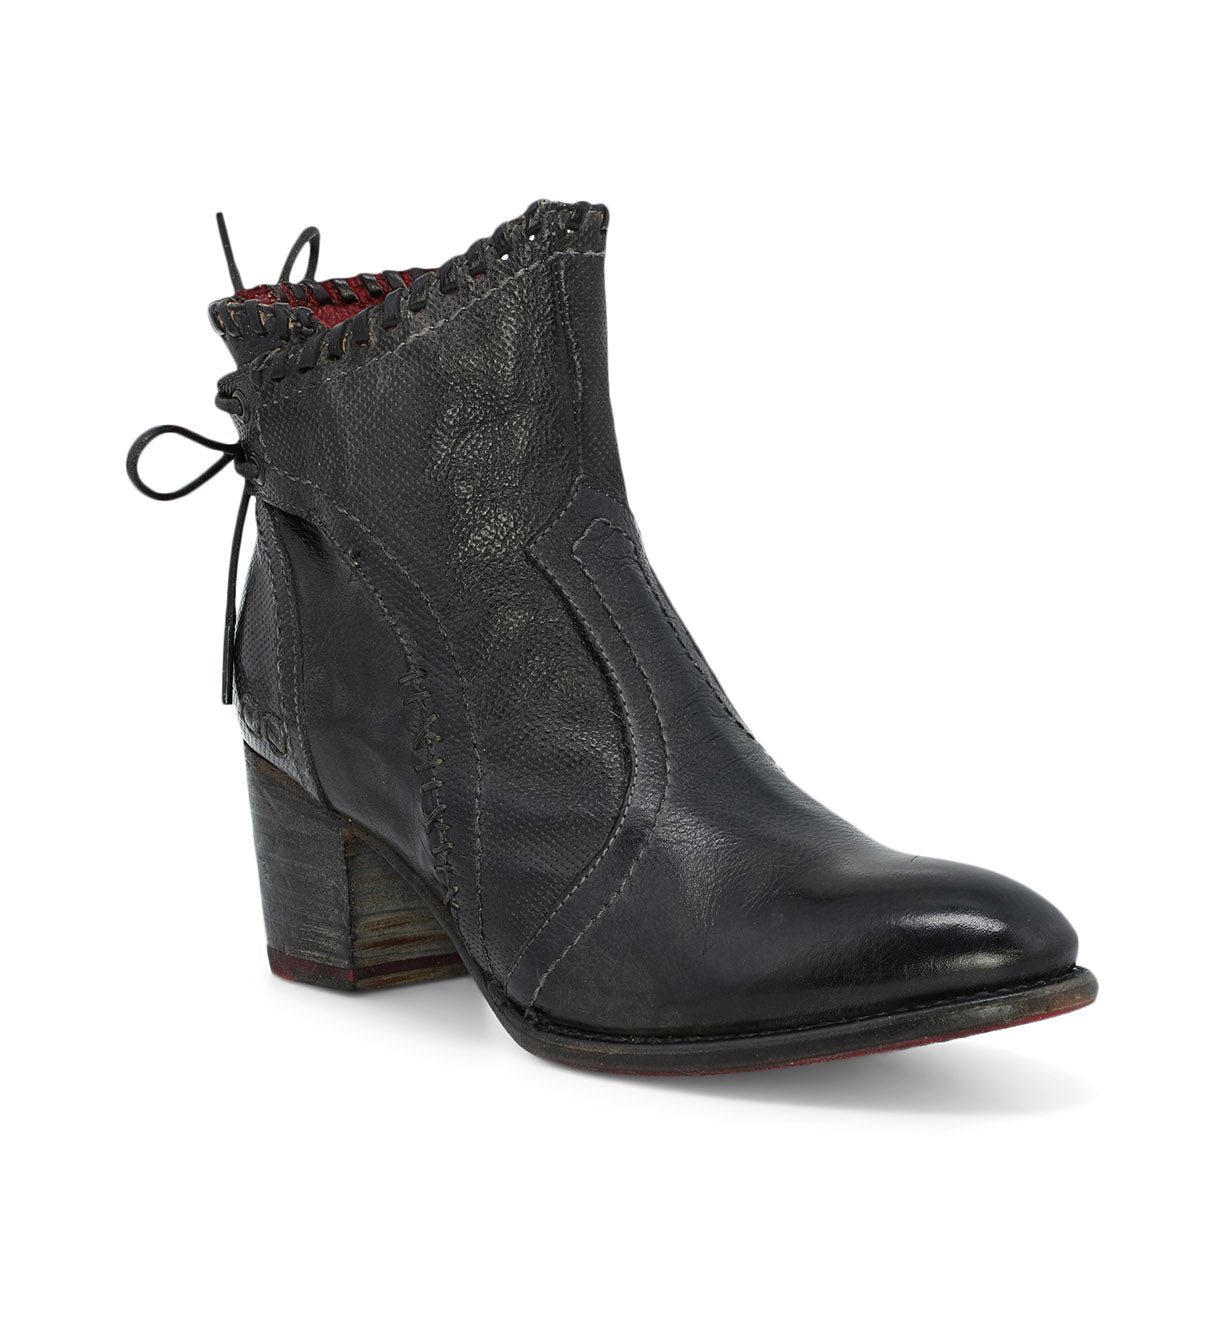 A women's black ankle boot with lace detailing called Bia by Bed Stu.